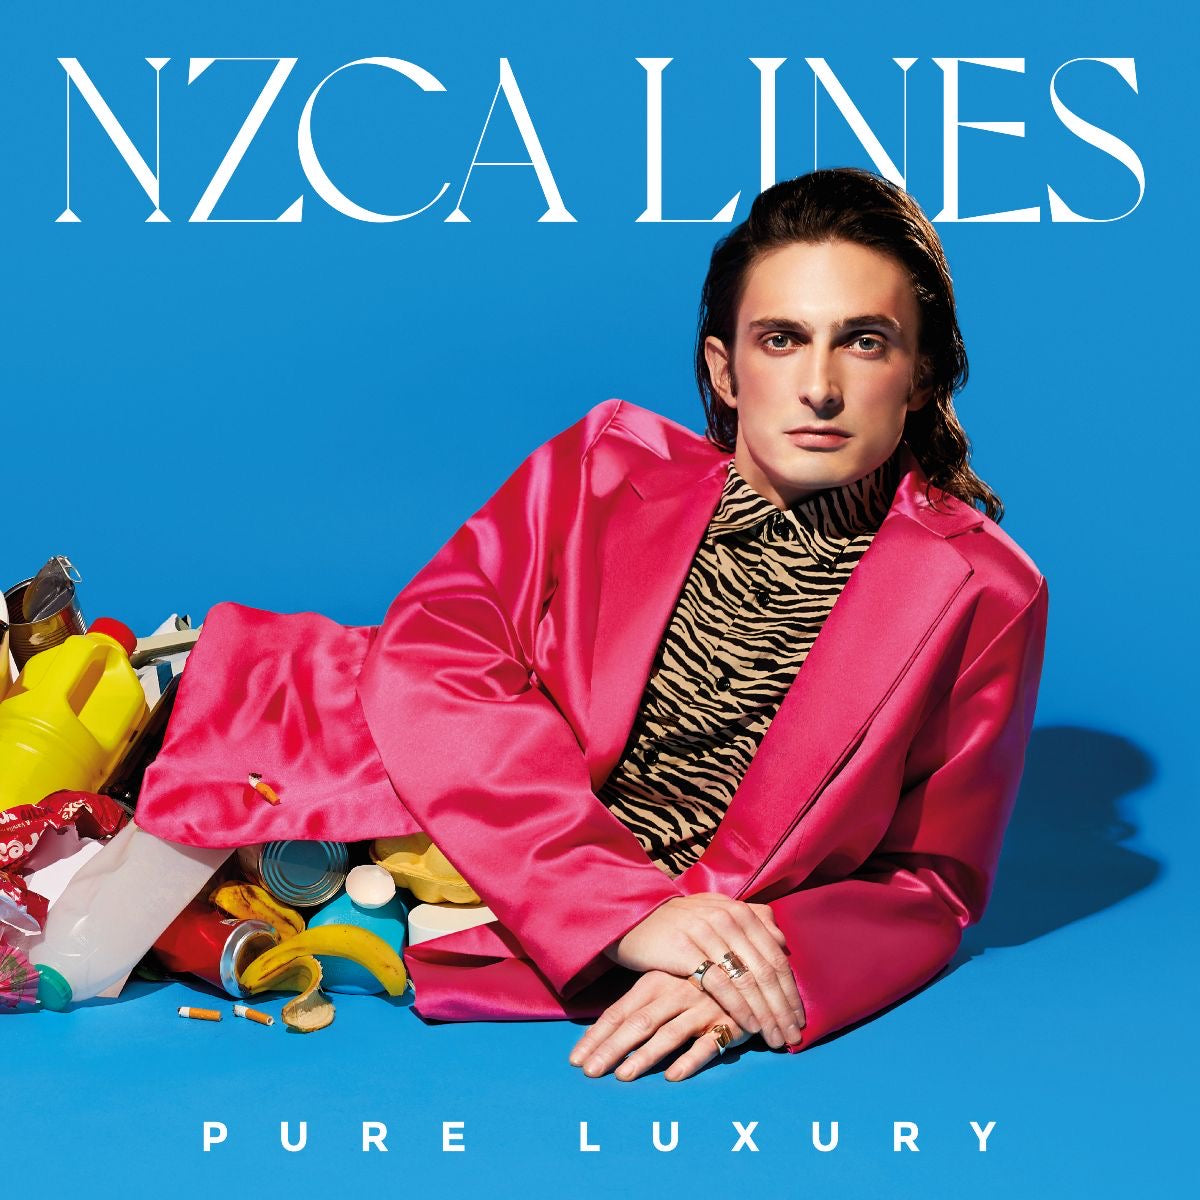 NZCA LINES - Pure Luxury (Love Record Stores Variant) - LP - Limited Vinyl